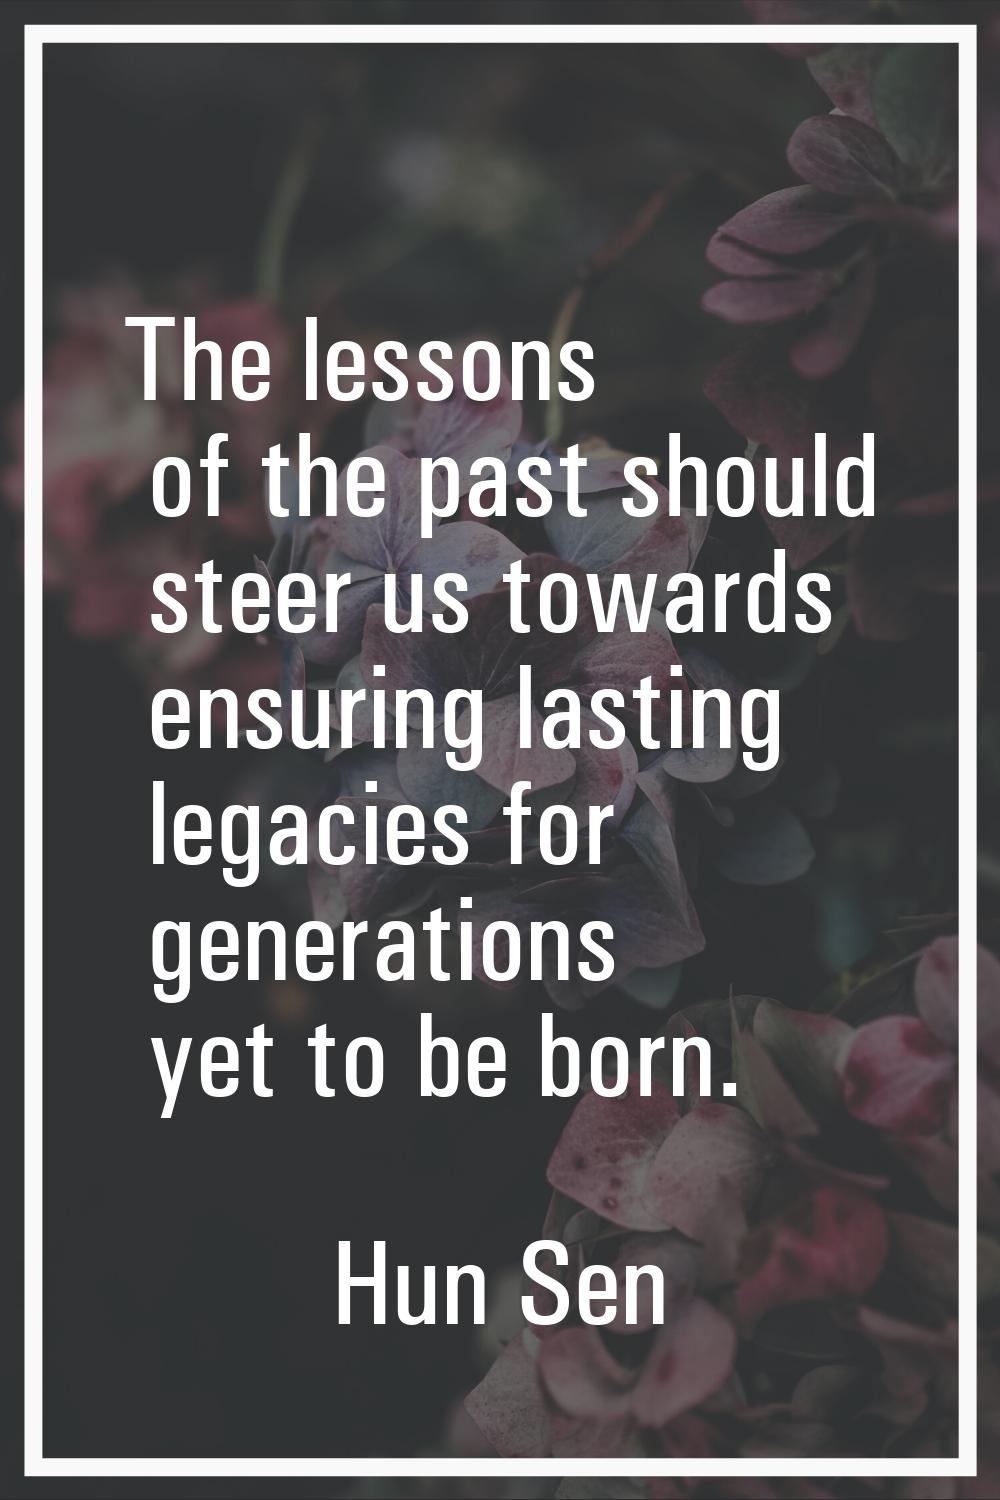 The lessons of the past should steer us towards ensuring lasting legacies for generations yet to be